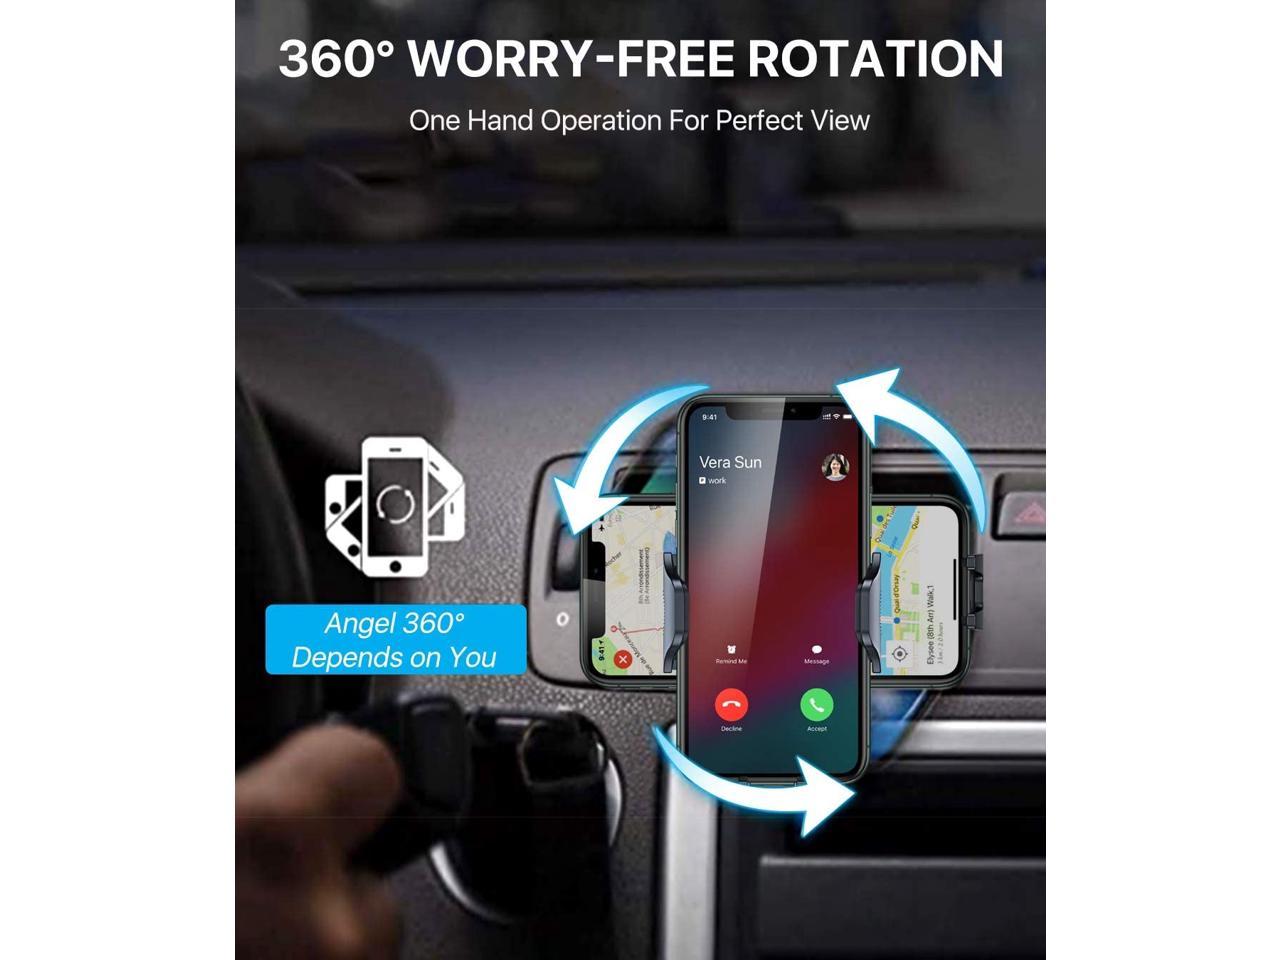 Car Phone Mount Ultimate Smartphone Car Air Vent Holder Easy Clamp Cradle Hands-Free Compatible with iPhone 11/11 Pro/11 Pro Max/8 Plus/8/X/XR/XS/SE Samsung Galaxy S20/S20+/S10/S9/Note 20/10